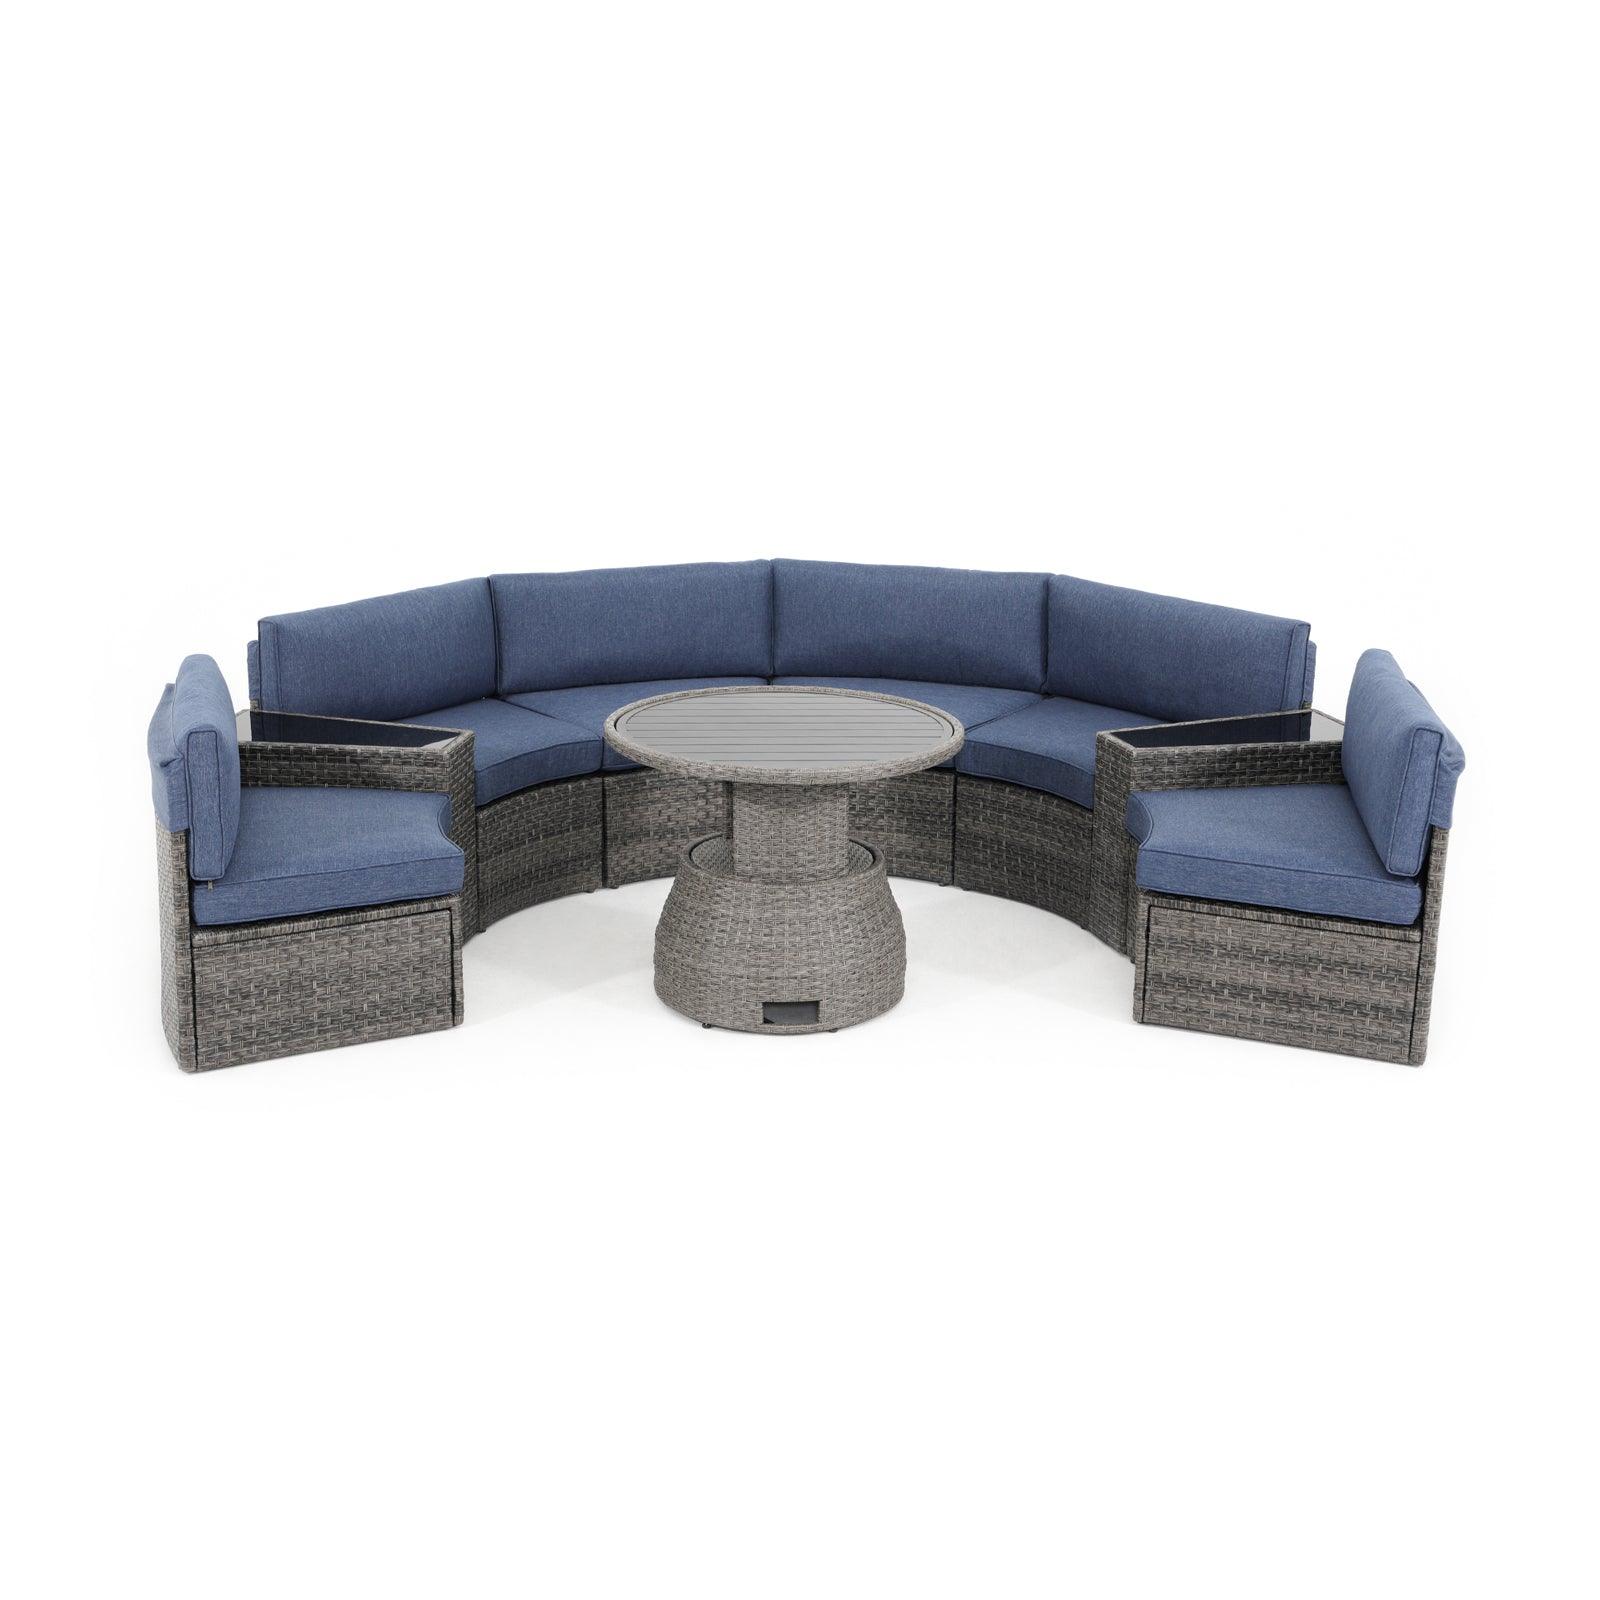 Boboli 6-seater Grey Outdoor Wicker Curved Sectional sofas with navy blue cushions + 2 wicker side tables + 1 Lift-top grey wicker round table, front view - Jardina Furniture#color_Navy Blue#piece_9-pc.